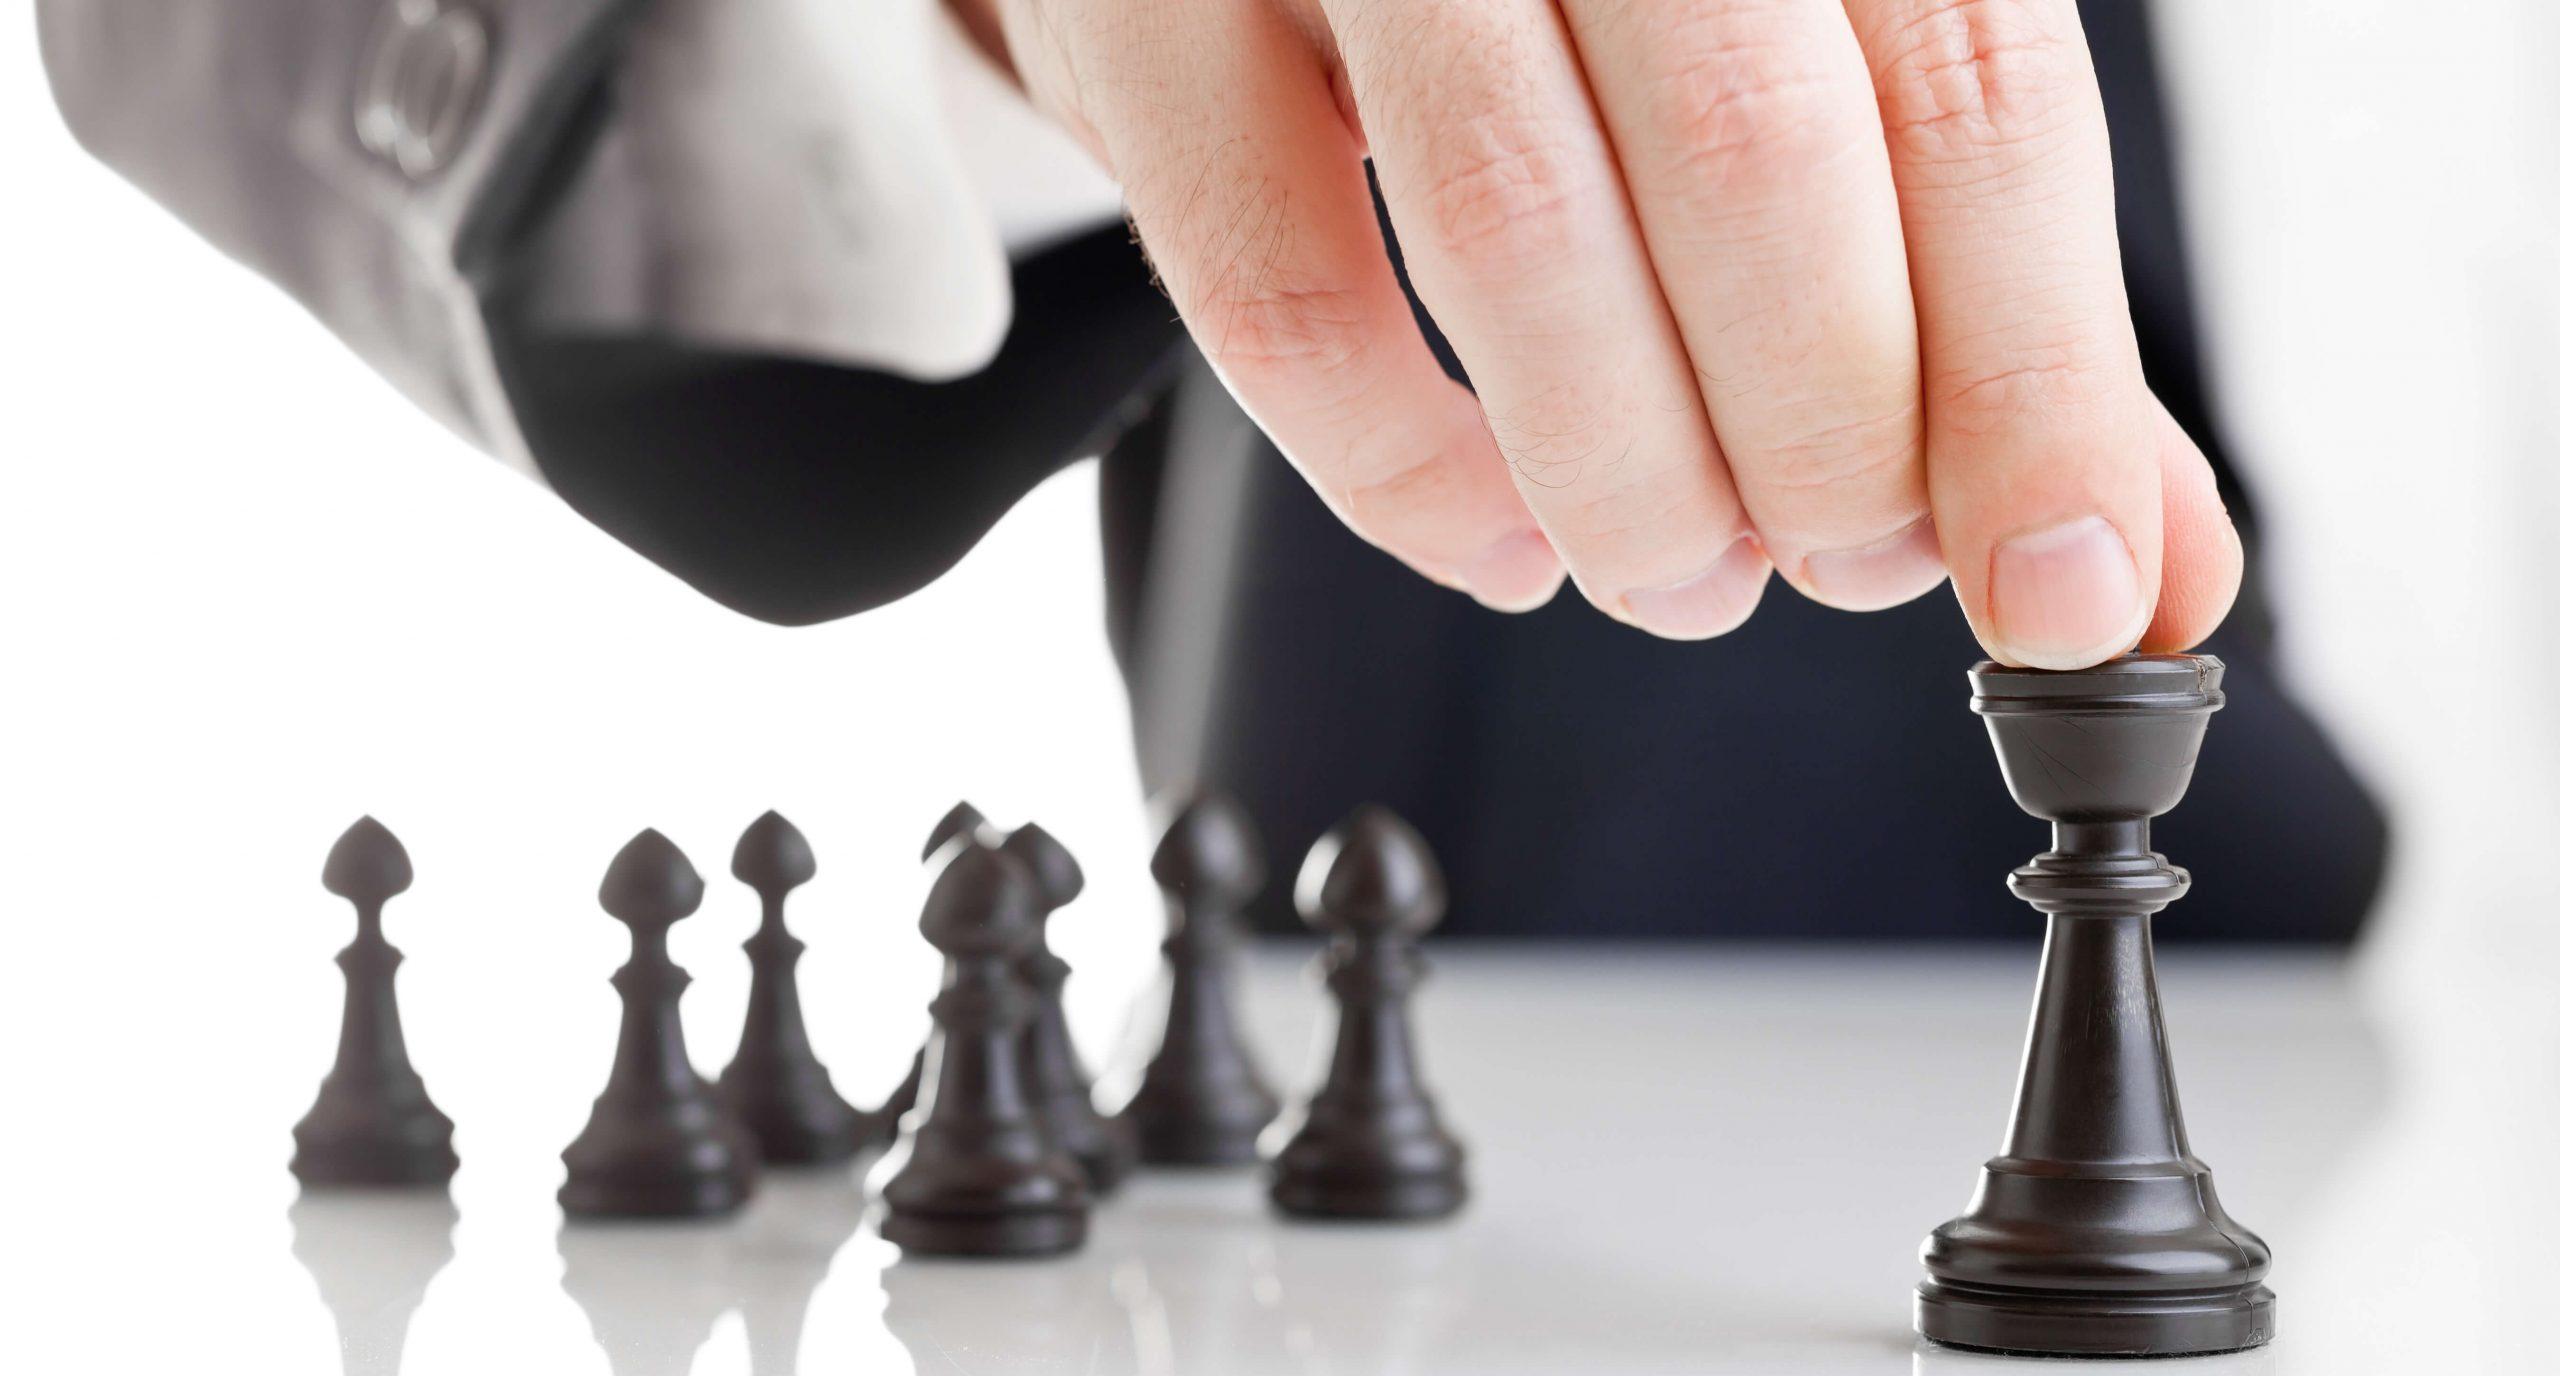 Strategic Planning and Tactical Opportunities - Consulting